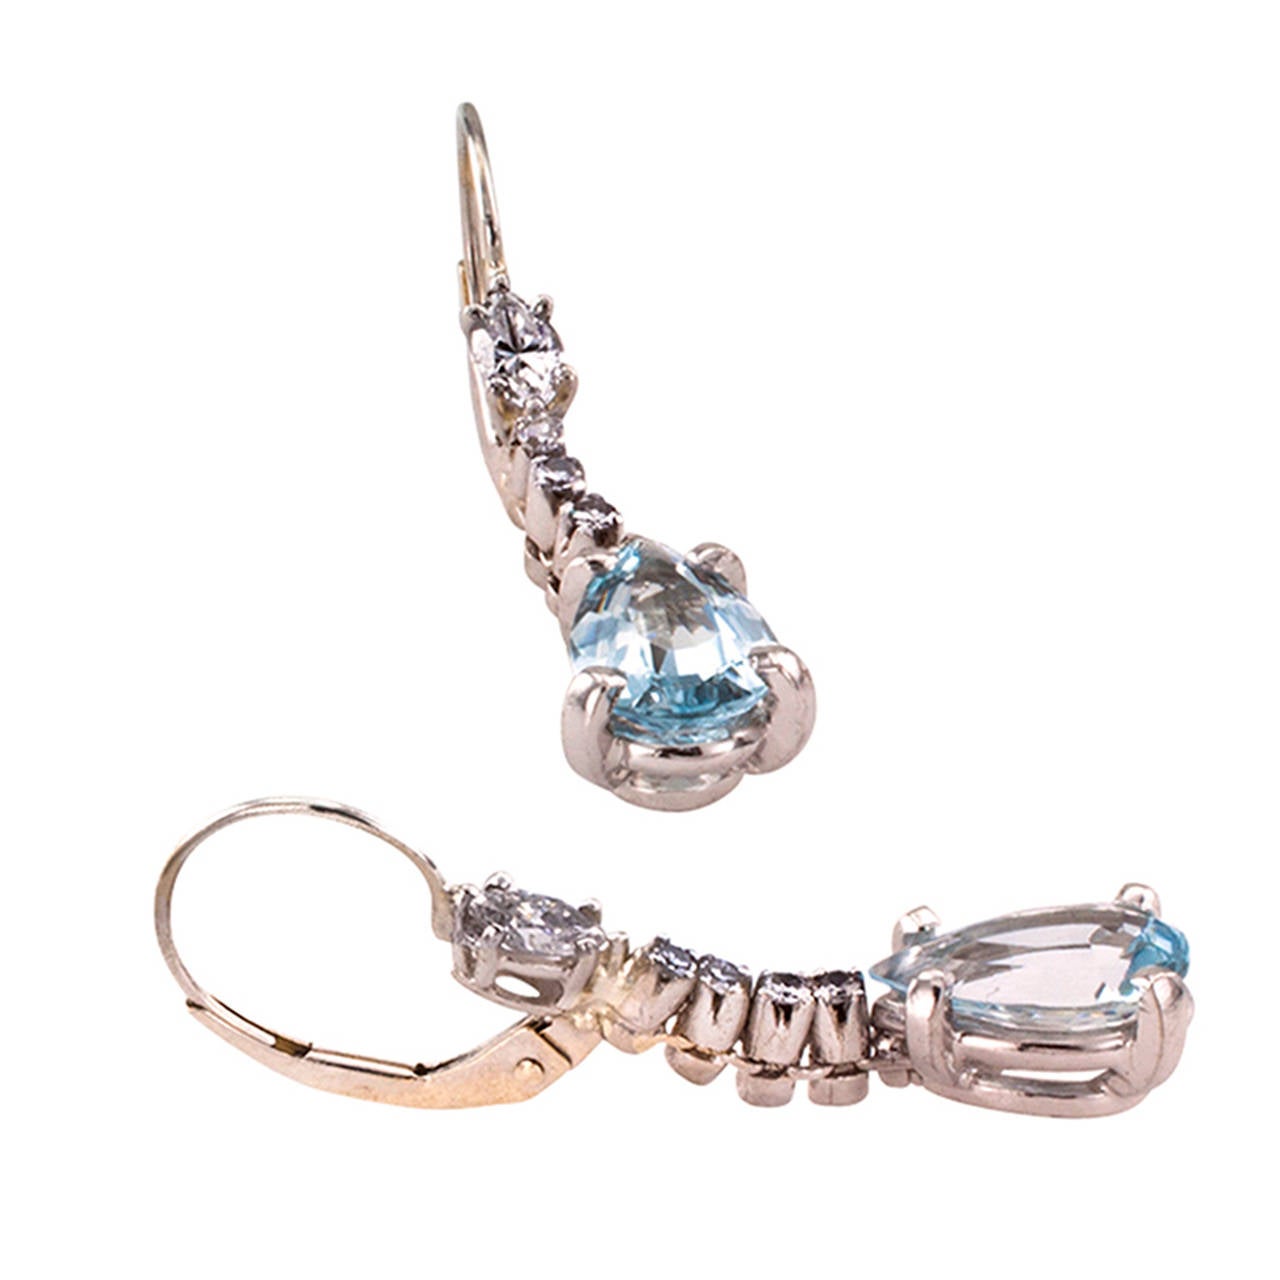 Estate Aquamarine And Diamond Pendant Earrings

Aquamarine and diamond may be the birthstones for March and April respectively, but they sure look nice together.  As in this attractive, easy, kind of everyday-wear pair of earrings.  The